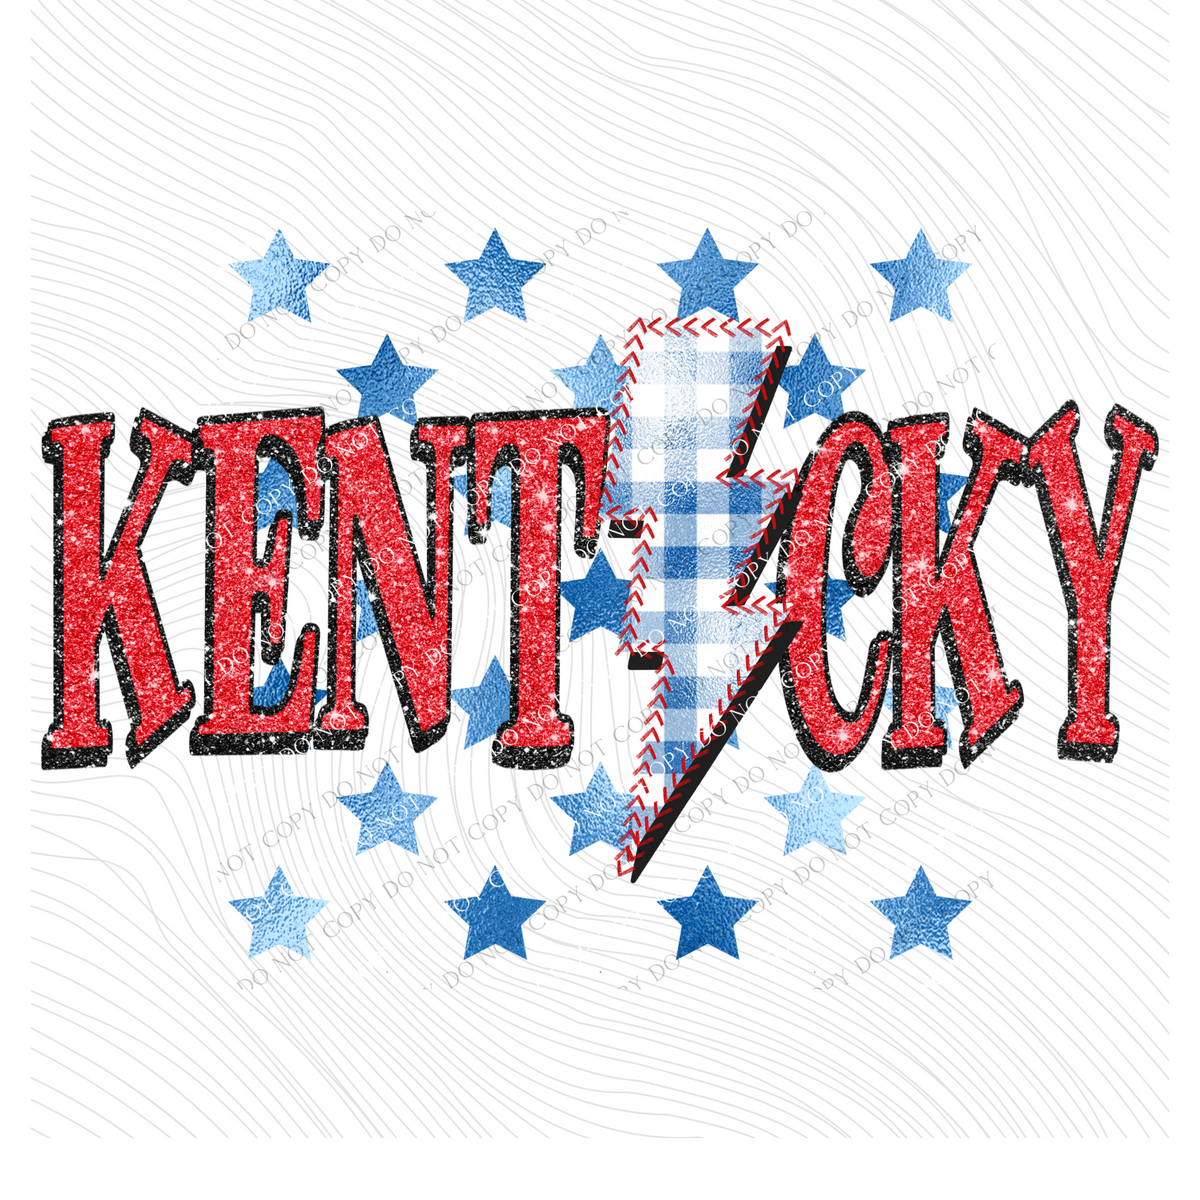 Kentucky Glitter with Foil Stars & Gingham Stitched Bolt in Red, White & Blue Patriotic Digital Design, PNG